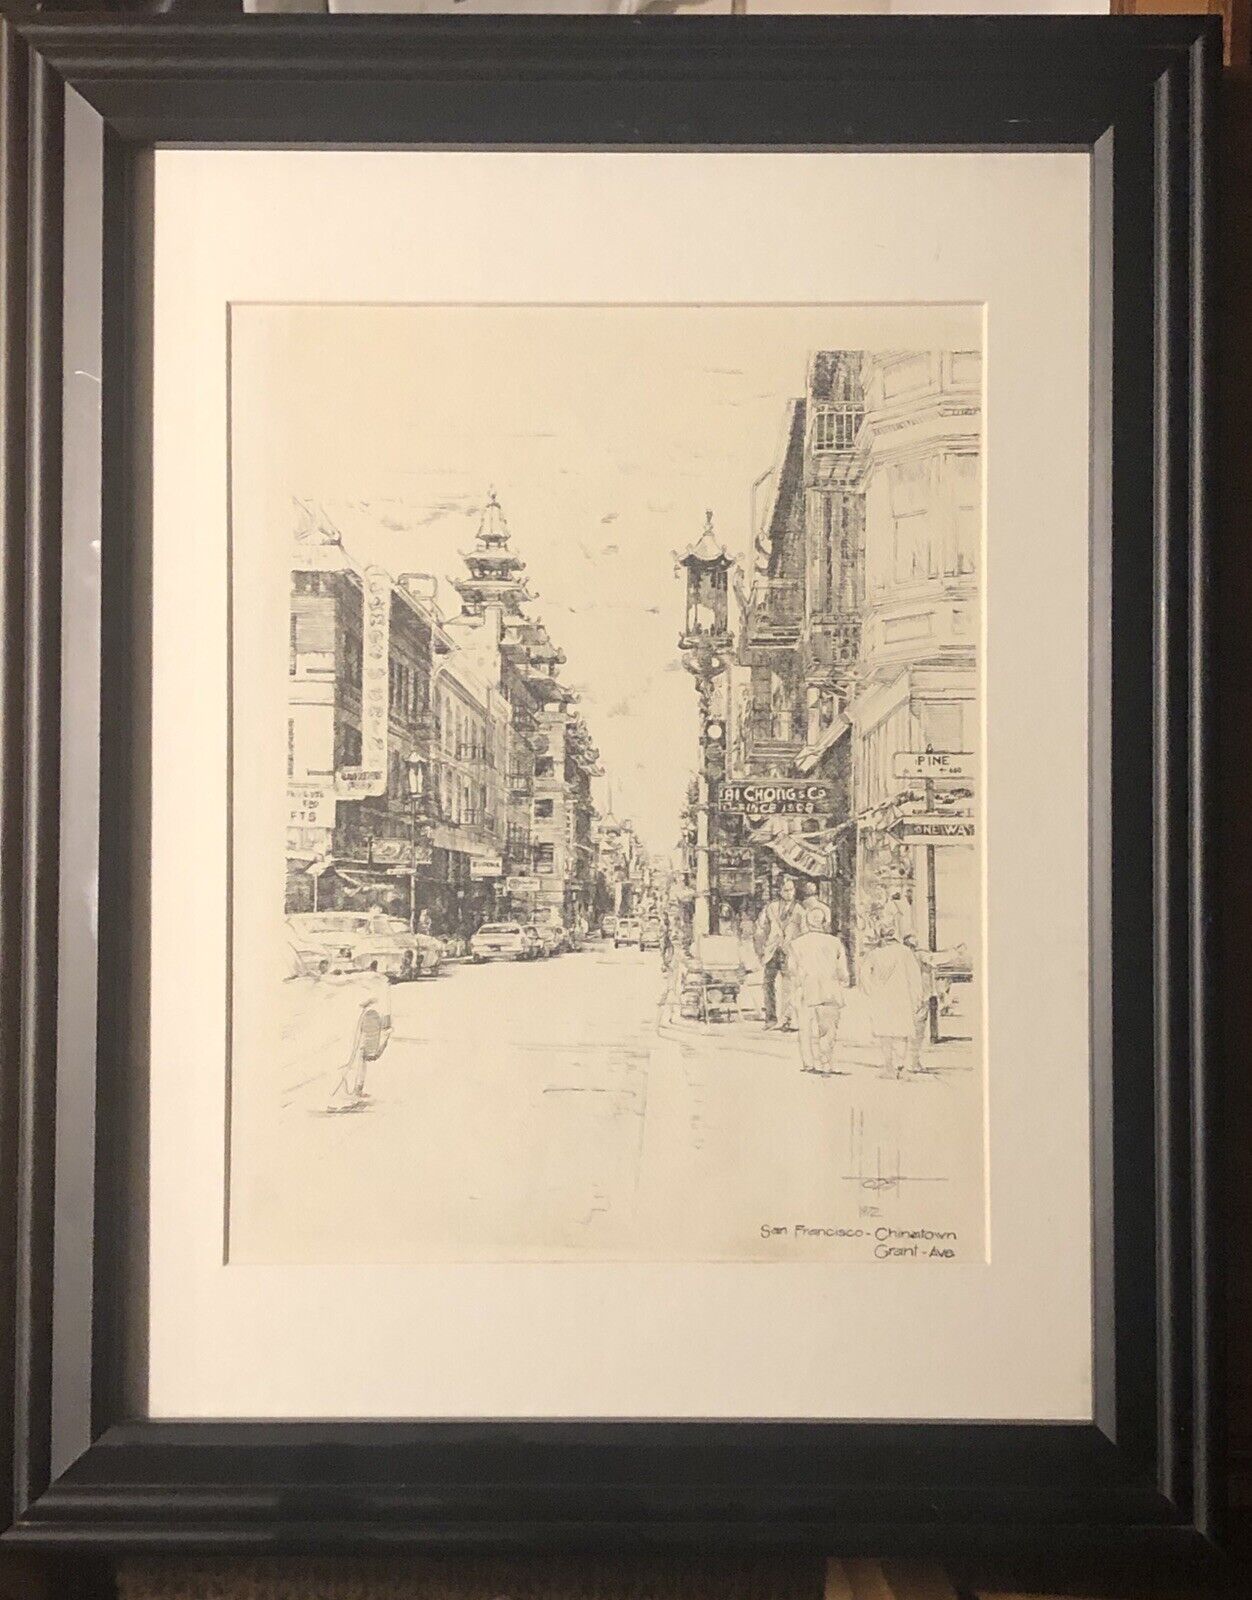 Etching Signed 1972 San Francisco Chinatown. Grant Ave